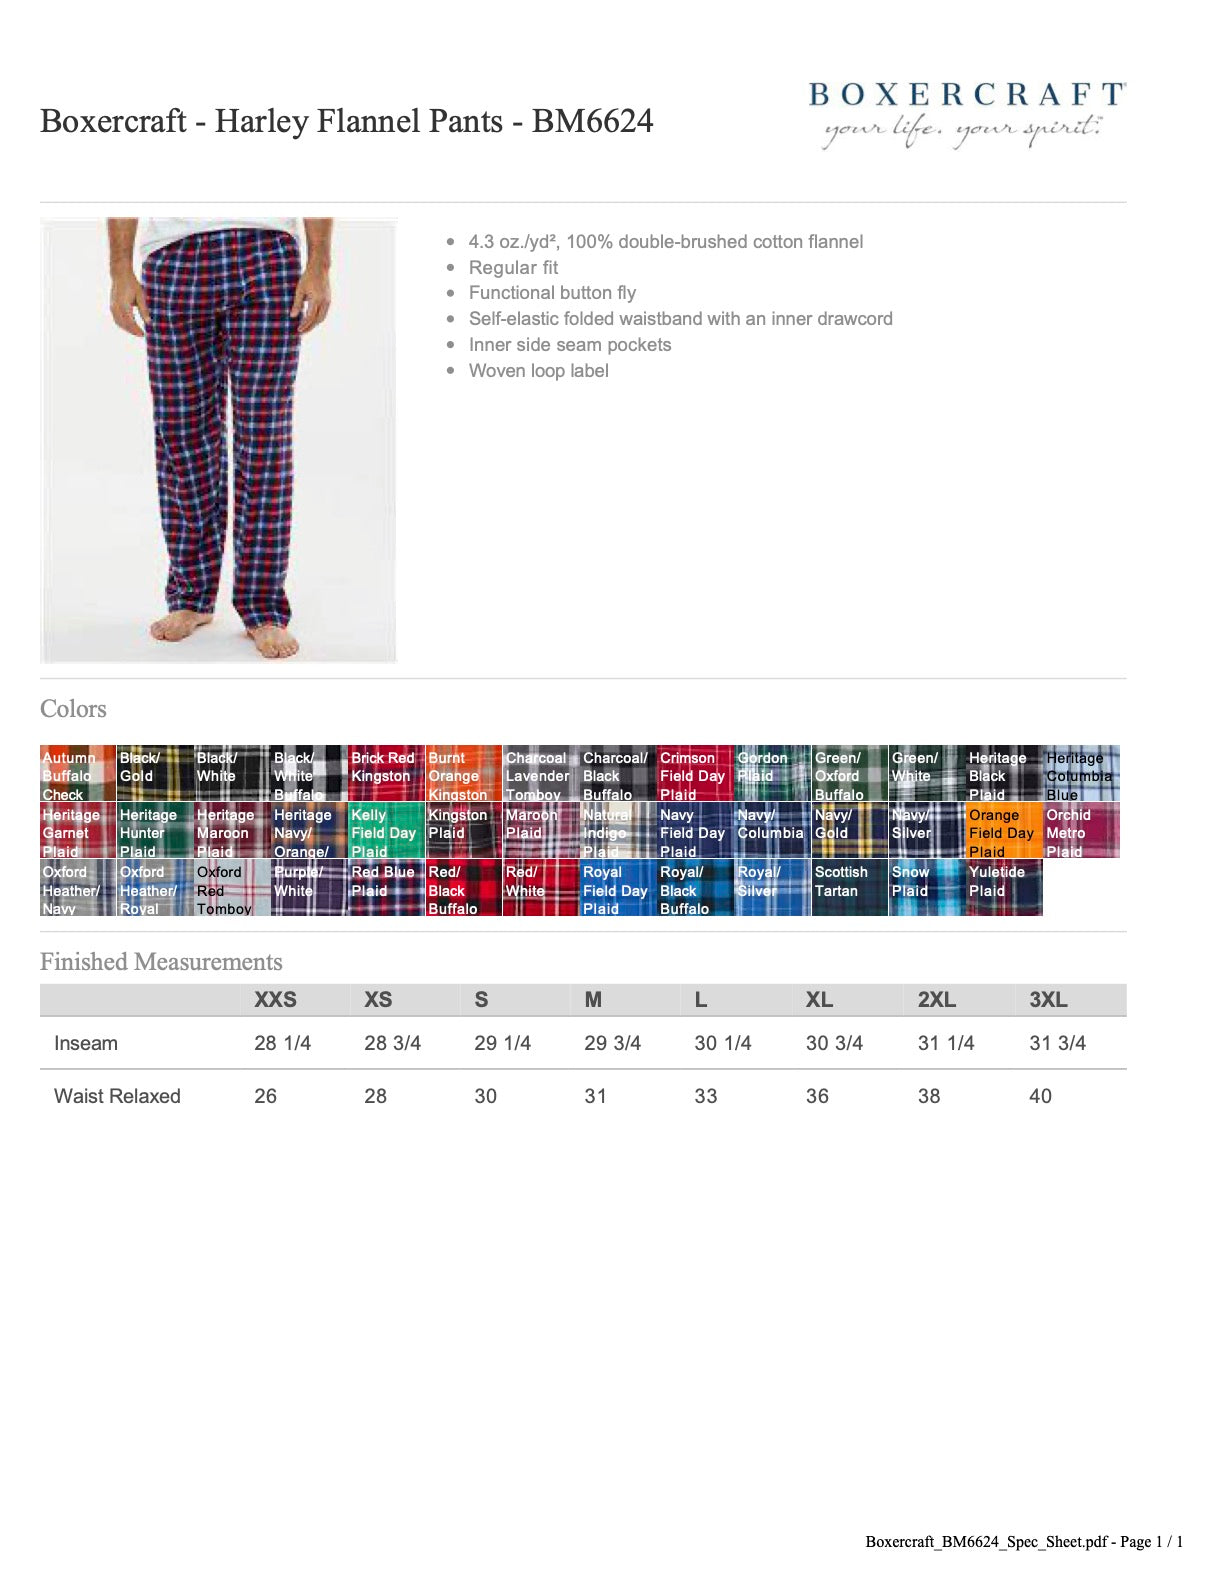 HIGHLAND MIDDLE SCHOOL H Flannel Pants